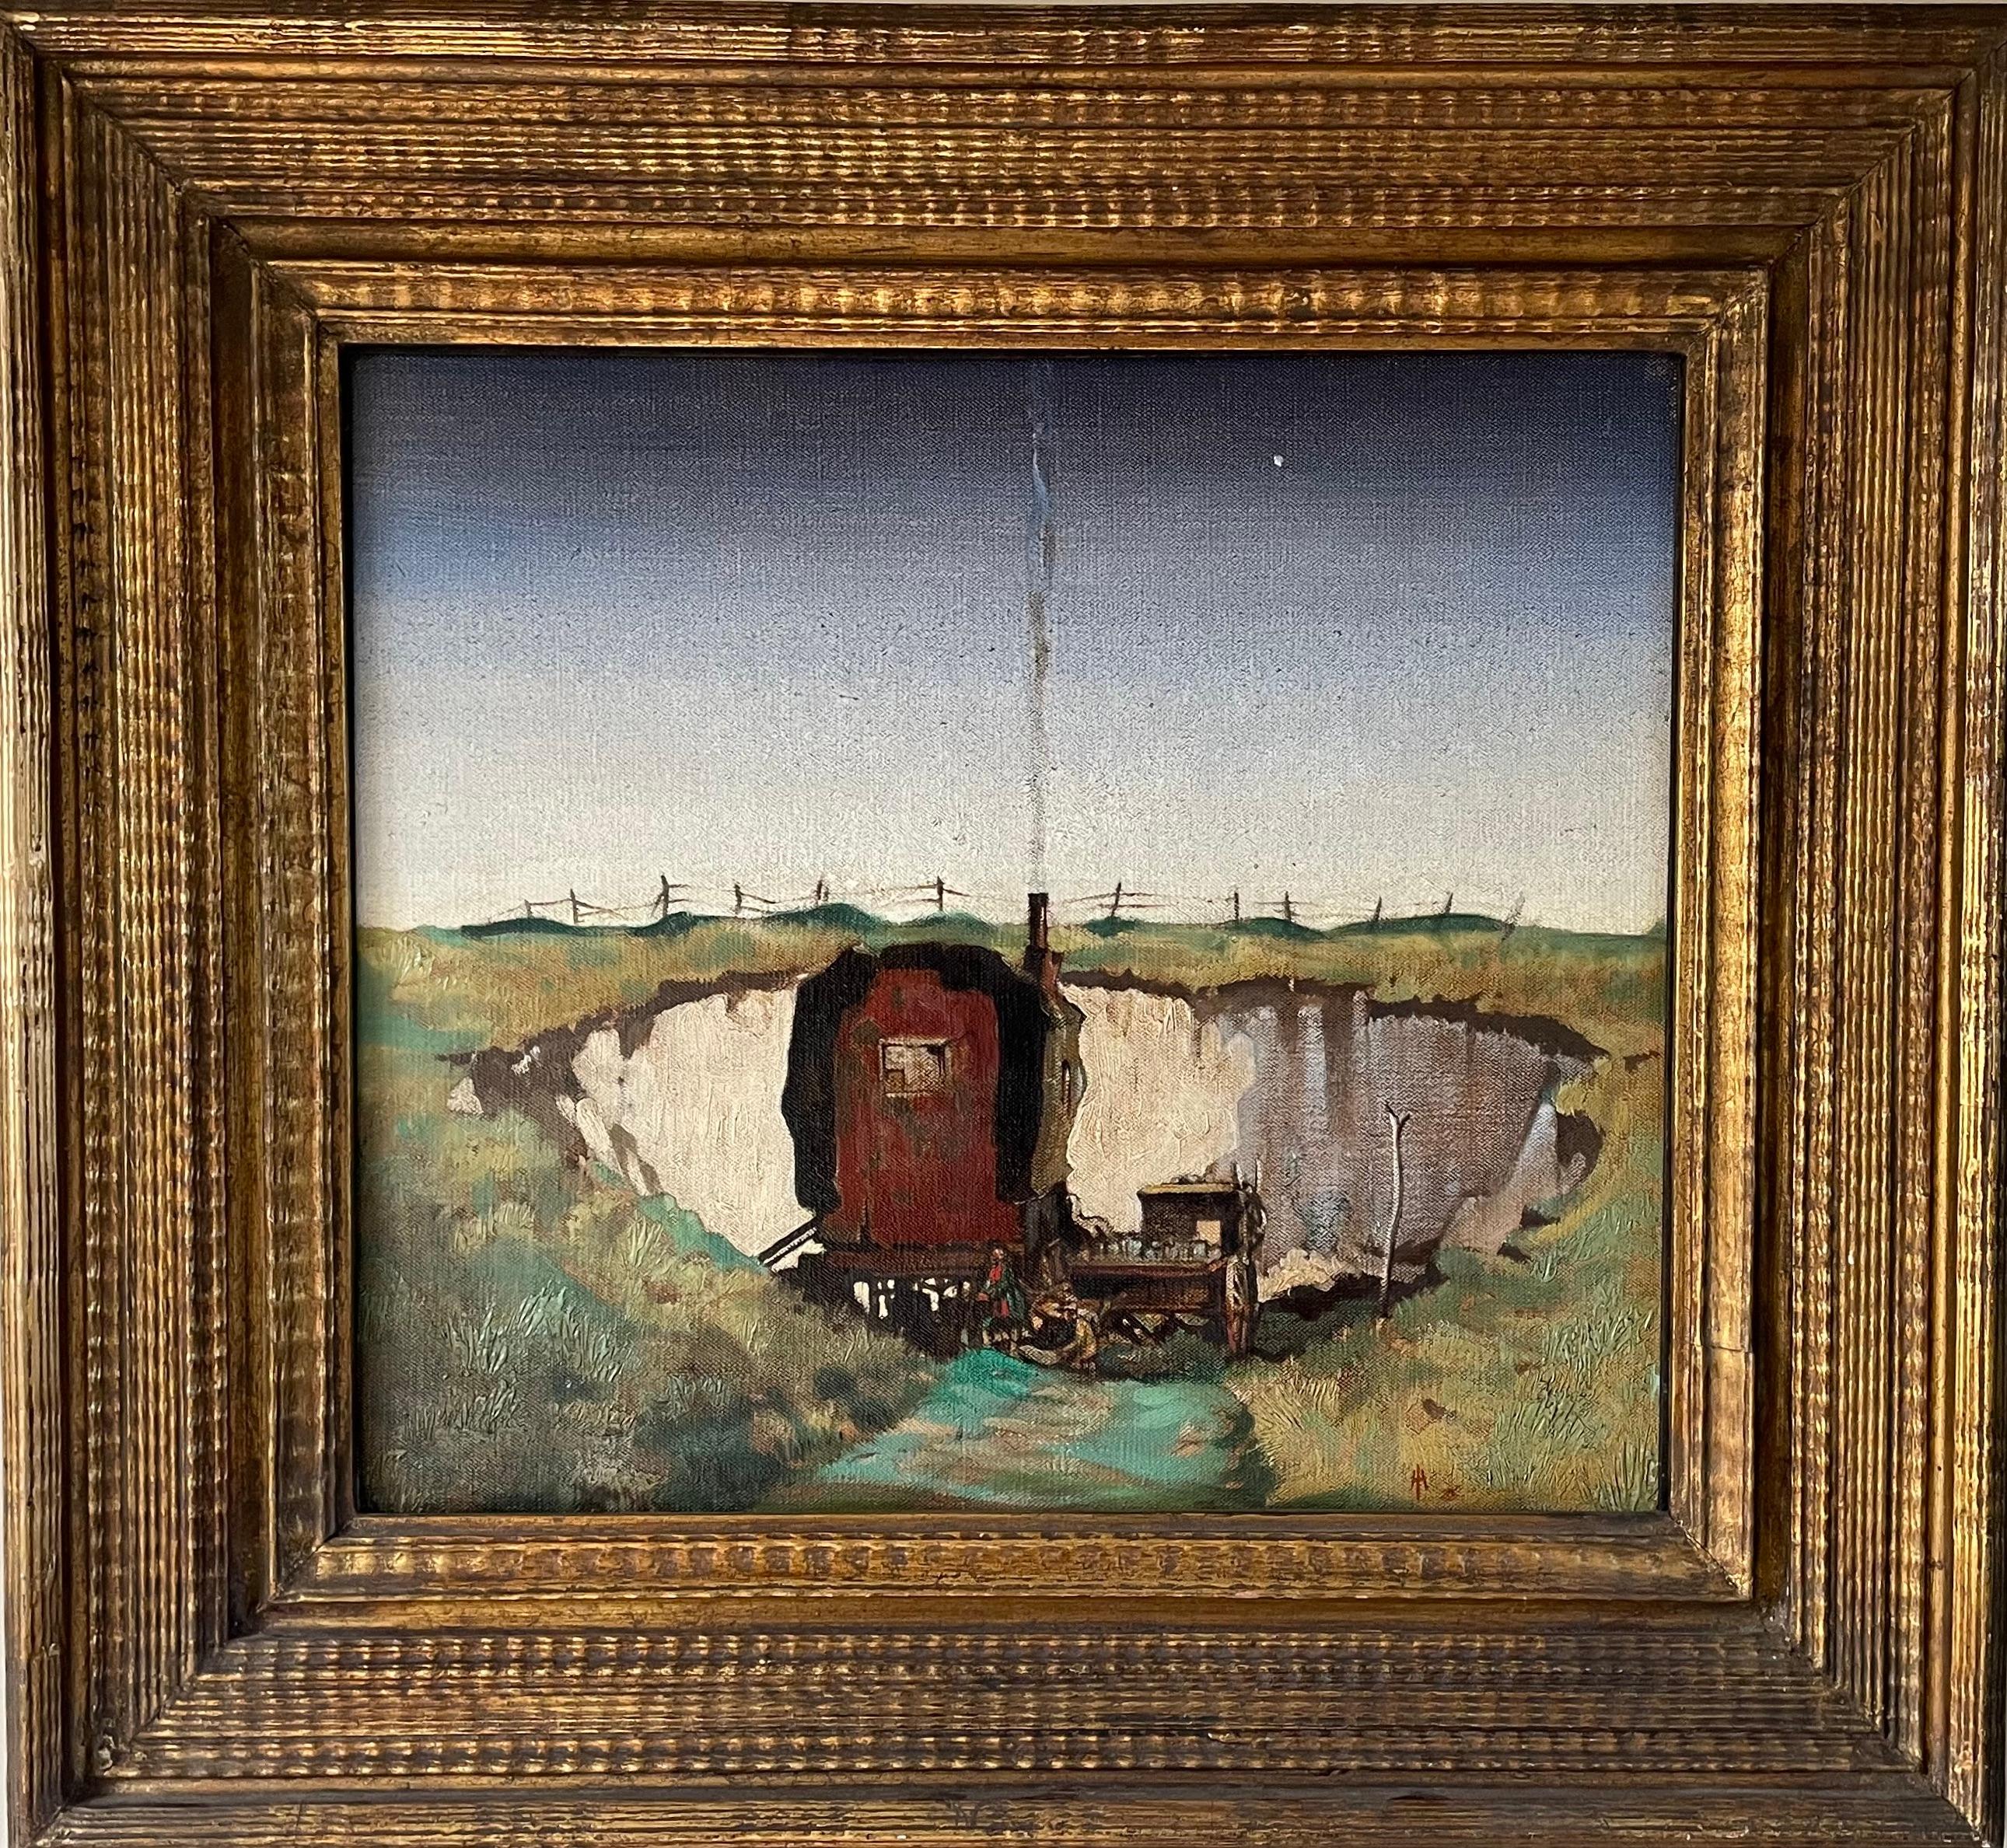 LAURENCE HENRY IRVING, OBE
 (1897-1988)

Gypsy Camp in a Chalk Pit

Signed with monogram
Oil on canvas
Framed

16 by 21 ½ in.; 40.5 by 54.5 cm.
(frame size 60 by 65 cm., 23 ½ by 25 ½ in)

Exhibited:
London, Royal Academy, 1928, no.557.

Laurence